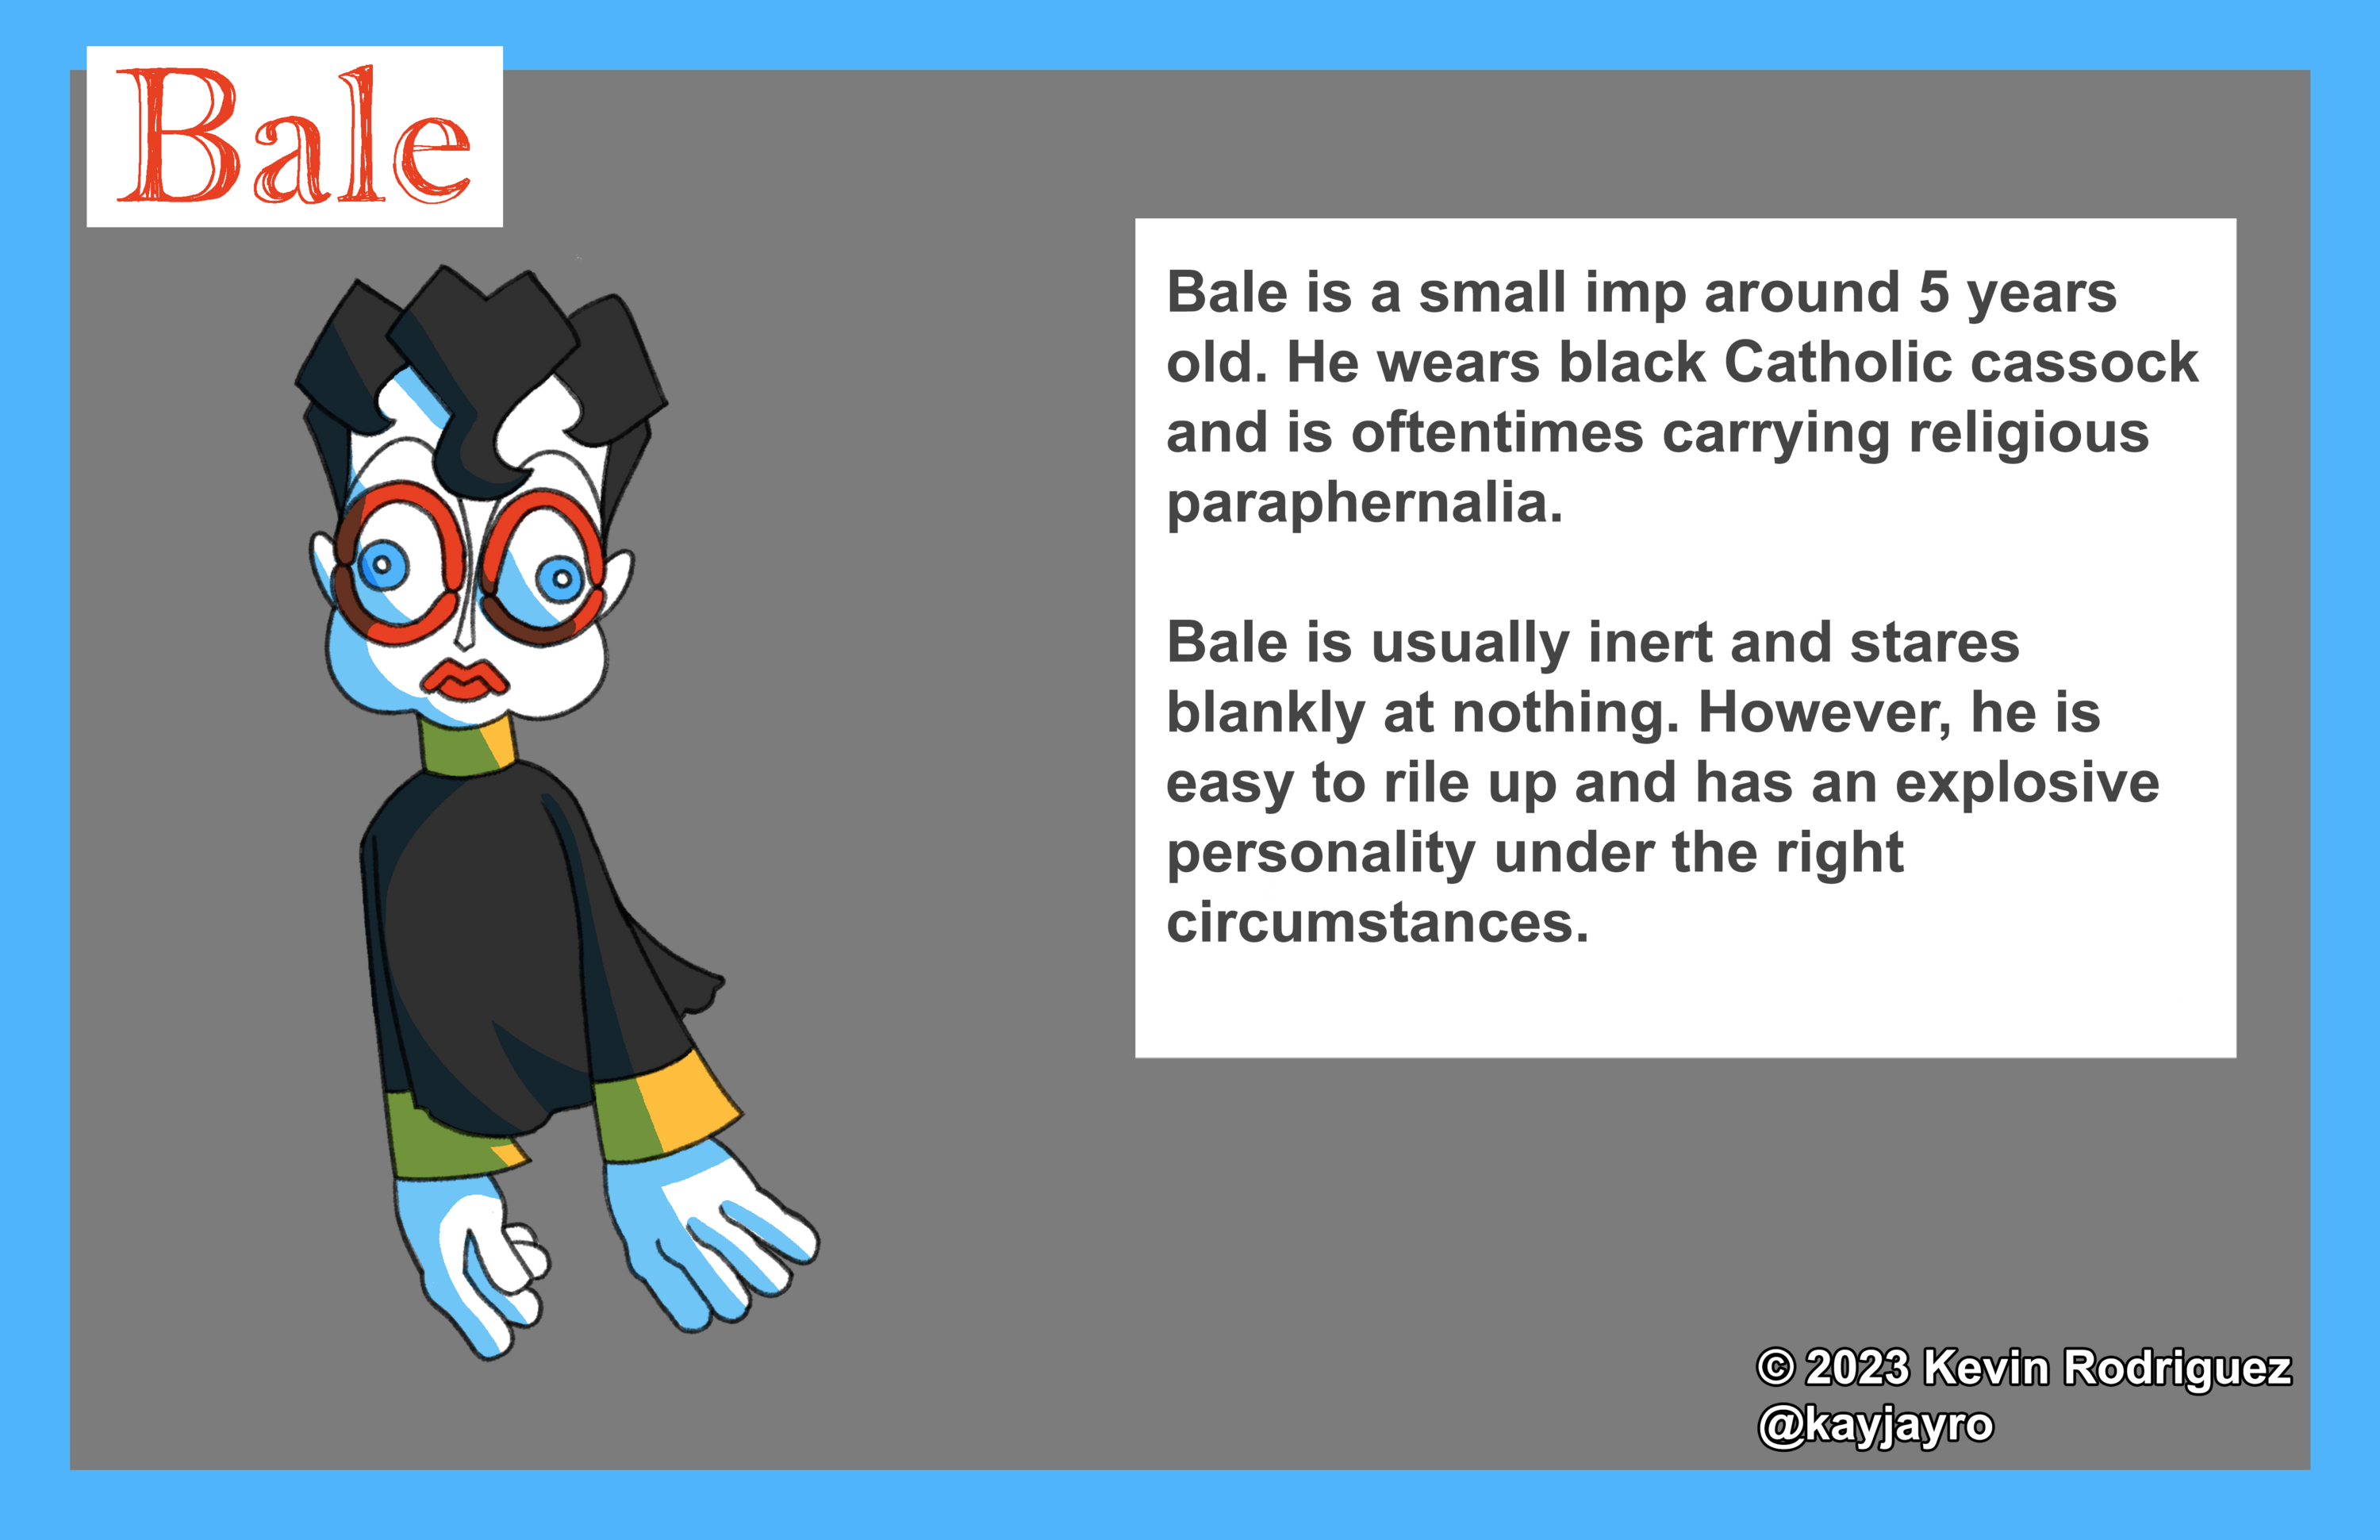 A page describing the character Bale